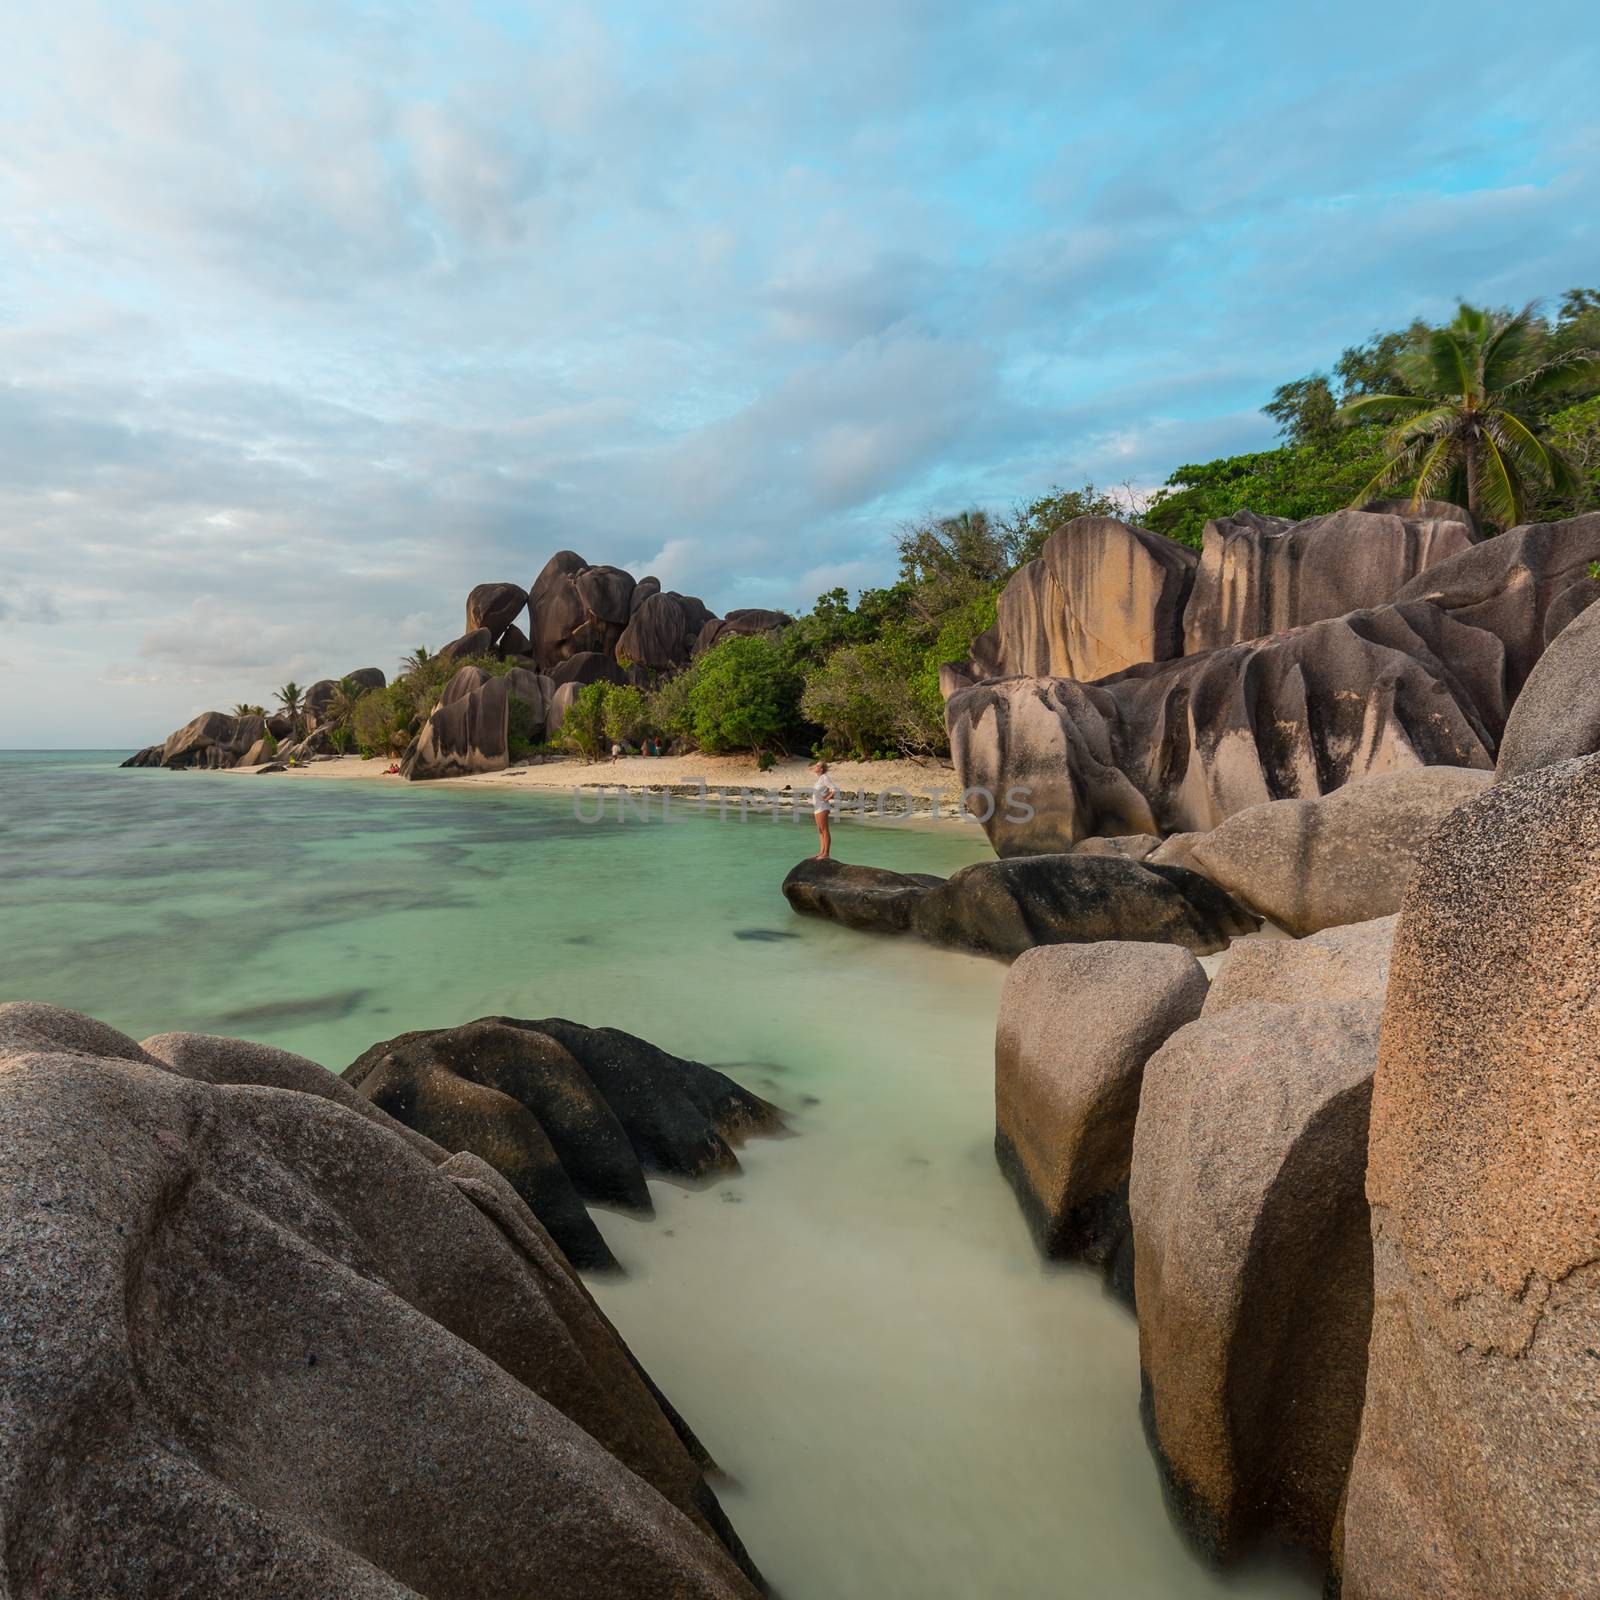 Beautifully shaped granite boulders and a dramatic sunset at picture perfect tropical Anse Source d'Argent beach, La Digue island, Seychelles.